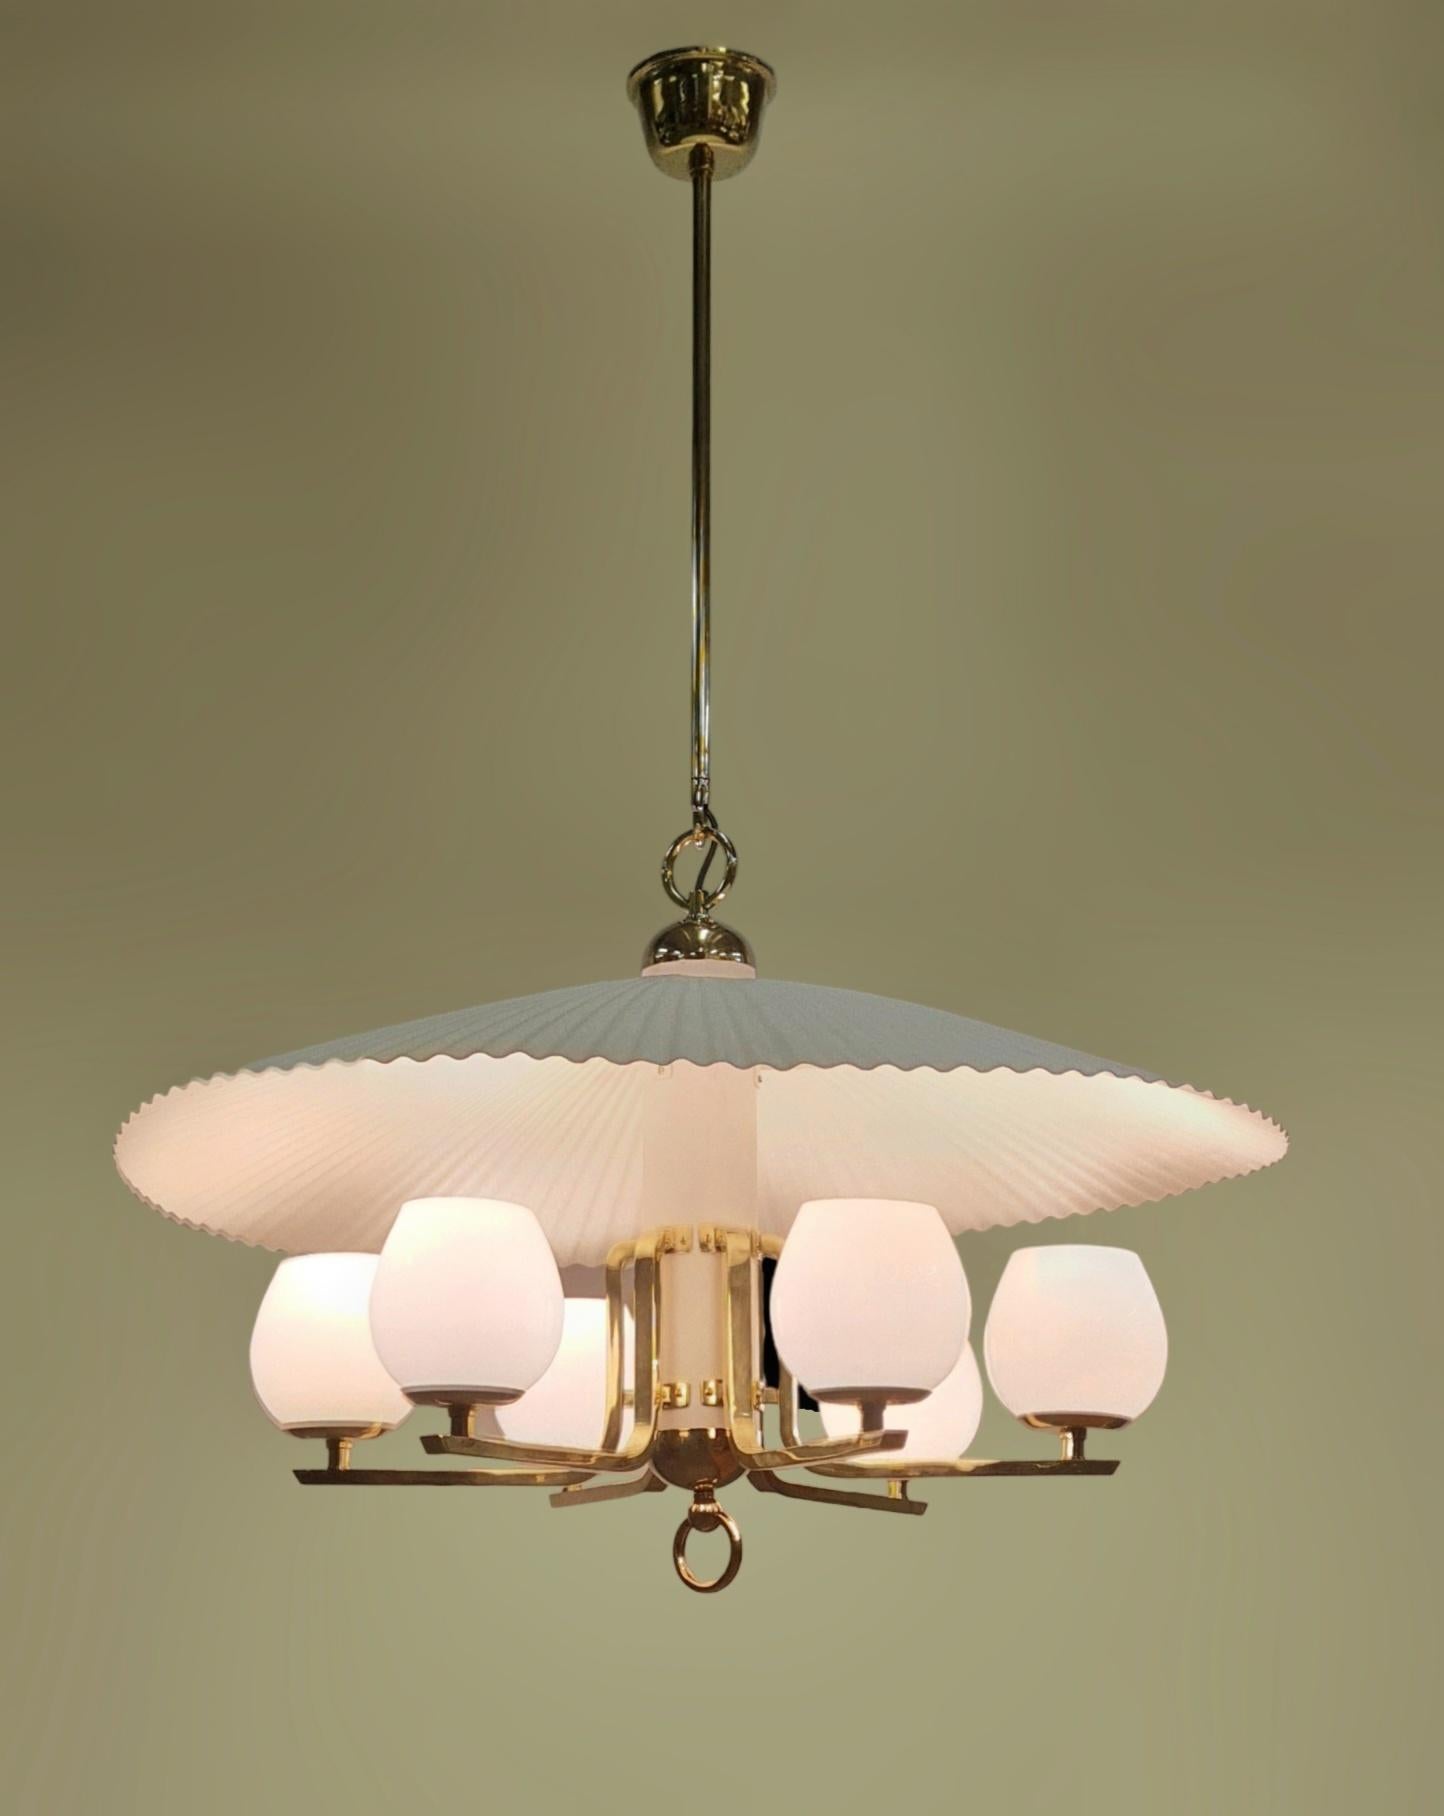 A Comissioned Paavo Tynell Ceiling Lamp, Taito, 1940s For Sale 6